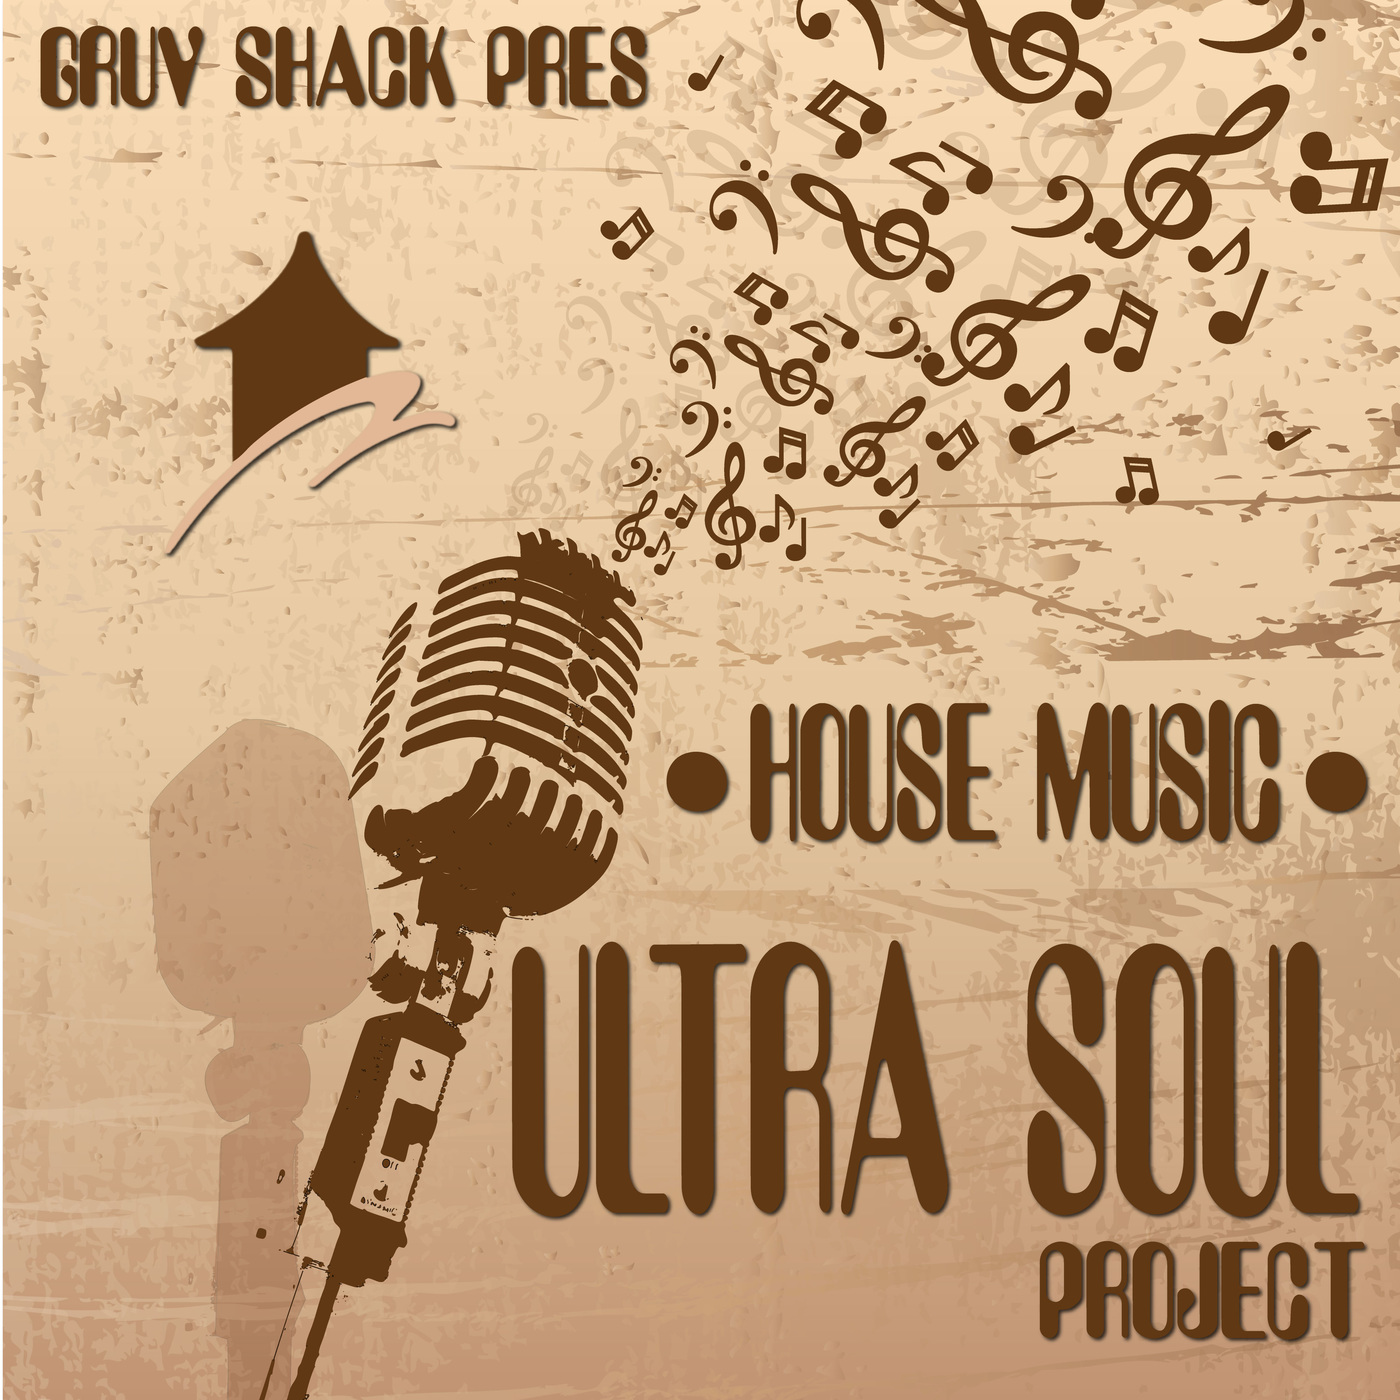 Ultra Soul Project - House Music / Gruv Shack Records